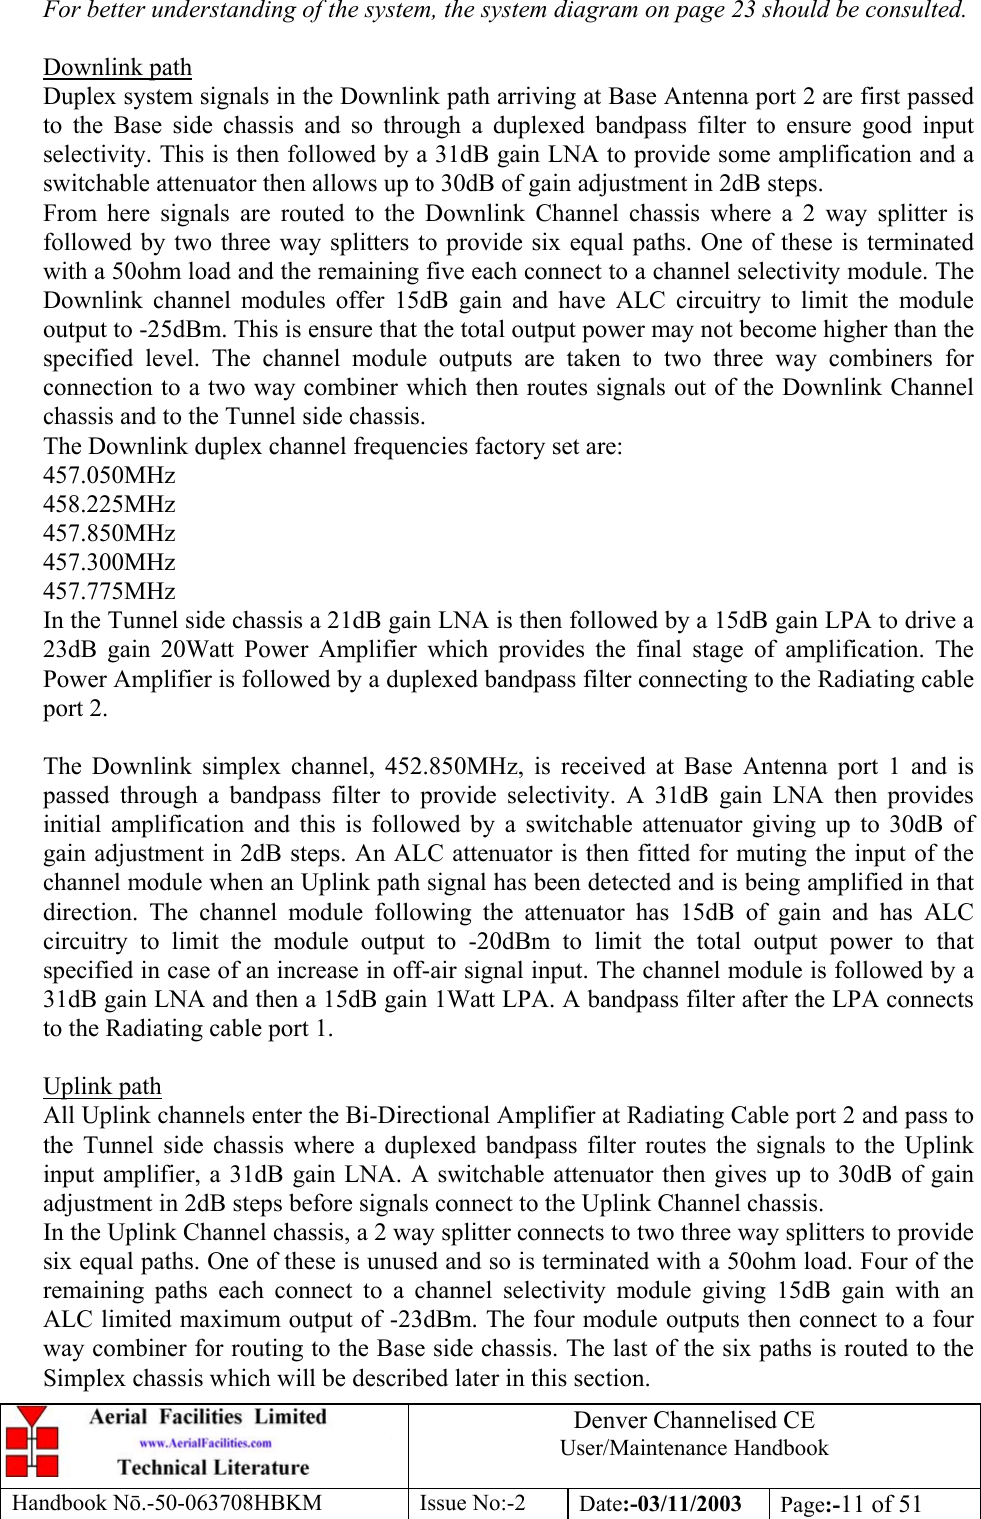 Denver Channelised CEUser/Maintenance HandbookHandbook Nō.-50-063708HBKM Issue No:-2 Date:-03/11/2003 Page:-11 of 51For better understanding of the system, the system diagram on page 23 should be consulted.Downlink pathDuplex system signals in the Downlink path arriving at Base Antenna port 2 are first passedto the Base side chassis and so through a duplexed bandpass filter to ensure good inputselectivity. This is then followed by a 31dB gain LNA to provide some amplification and aswitchable attenuator then allows up to 30dB of gain adjustment in 2dB steps.From here signals are routed to the Downlink Channel chassis where a 2 way splitter isfollowed by two three way splitters to provide six equal paths. One of these is terminatedwith a 50ohm load and the remaining five each connect to a channel selectivity module. TheDownlink channel modules offer 15dB gain and have ALC circuitry to limit the moduleoutput to -25dBm. This is ensure that the total output power may not become higher than thespecified level. The channel module outputs are taken to two three way combiners forconnection to a two way combiner which then routes signals out of the Downlink Channelchassis and to the Tunnel side chassis.The Downlink duplex channel frequencies factory set are:457.050MHz458.225MHz457.850MHz457.300MHz457.775MHzIn the Tunnel side chassis a 21dB gain LNA is then followed by a 15dB gain LPA to drive a23dB gain 20Watt Power Amplifier which provides the final stage of amplification. ThePower Amplifier is followed by a duplexed bandpass filter connecting to the Radiating cableport 2.The Downlink simplex channel, 452.850MHz, is received at Base Antenna port 1 and ispassed through a bandpass filter to provide selectivity. A 31dB gain LNA then providesinitial amplification and this is followed by a switchable attenuator giving up to 30dB ofgain adjustment in 2dB steps. An ALC attenuator is then fitted for muting the input of thechannel module when an Uplink path signal has been detected and is being amplified in thatdirection. The channel module following the attenuator has 15dB of gain and has ALCcircuitry to limit the module output to -20dBm to limit the total output power to thatspecified in case of an increase in off-air signal input. The channel module is followed by a31dB gain LNA and then a 15dB gain 1Watt LPA. A bandpass filter after the LPA connectsto the Radiating cable port 1.Uplink pathAll Uplink channels enter the Bi-Directional Amplifier at Radiating Cable port 2 and pass tothe Tunnel side chassis where a duplexed bandpass filter routes the signals to the Uplinkinput amplifier, a 31dB gain LNA. A switchable attenuator then gives up to 30dB of gainadjustment in 2dB steps before signals connect to the Uplink Channel chassis.In the Uplink Channel chassis, a 2 way splitter connects to two three way splitters to providesix equal paths. One of these is unused and so is terminated with a 50ohm load. Four of theremaining paths each connect to a channel selectivity module giving 15dB gain with anALC limited maximum output of -23dBm. The four module outputs then connect to a fourway combiner for routing to the Base side chassis. The last of the six paths is routed to theSimplex chassis which will be described later in this section.